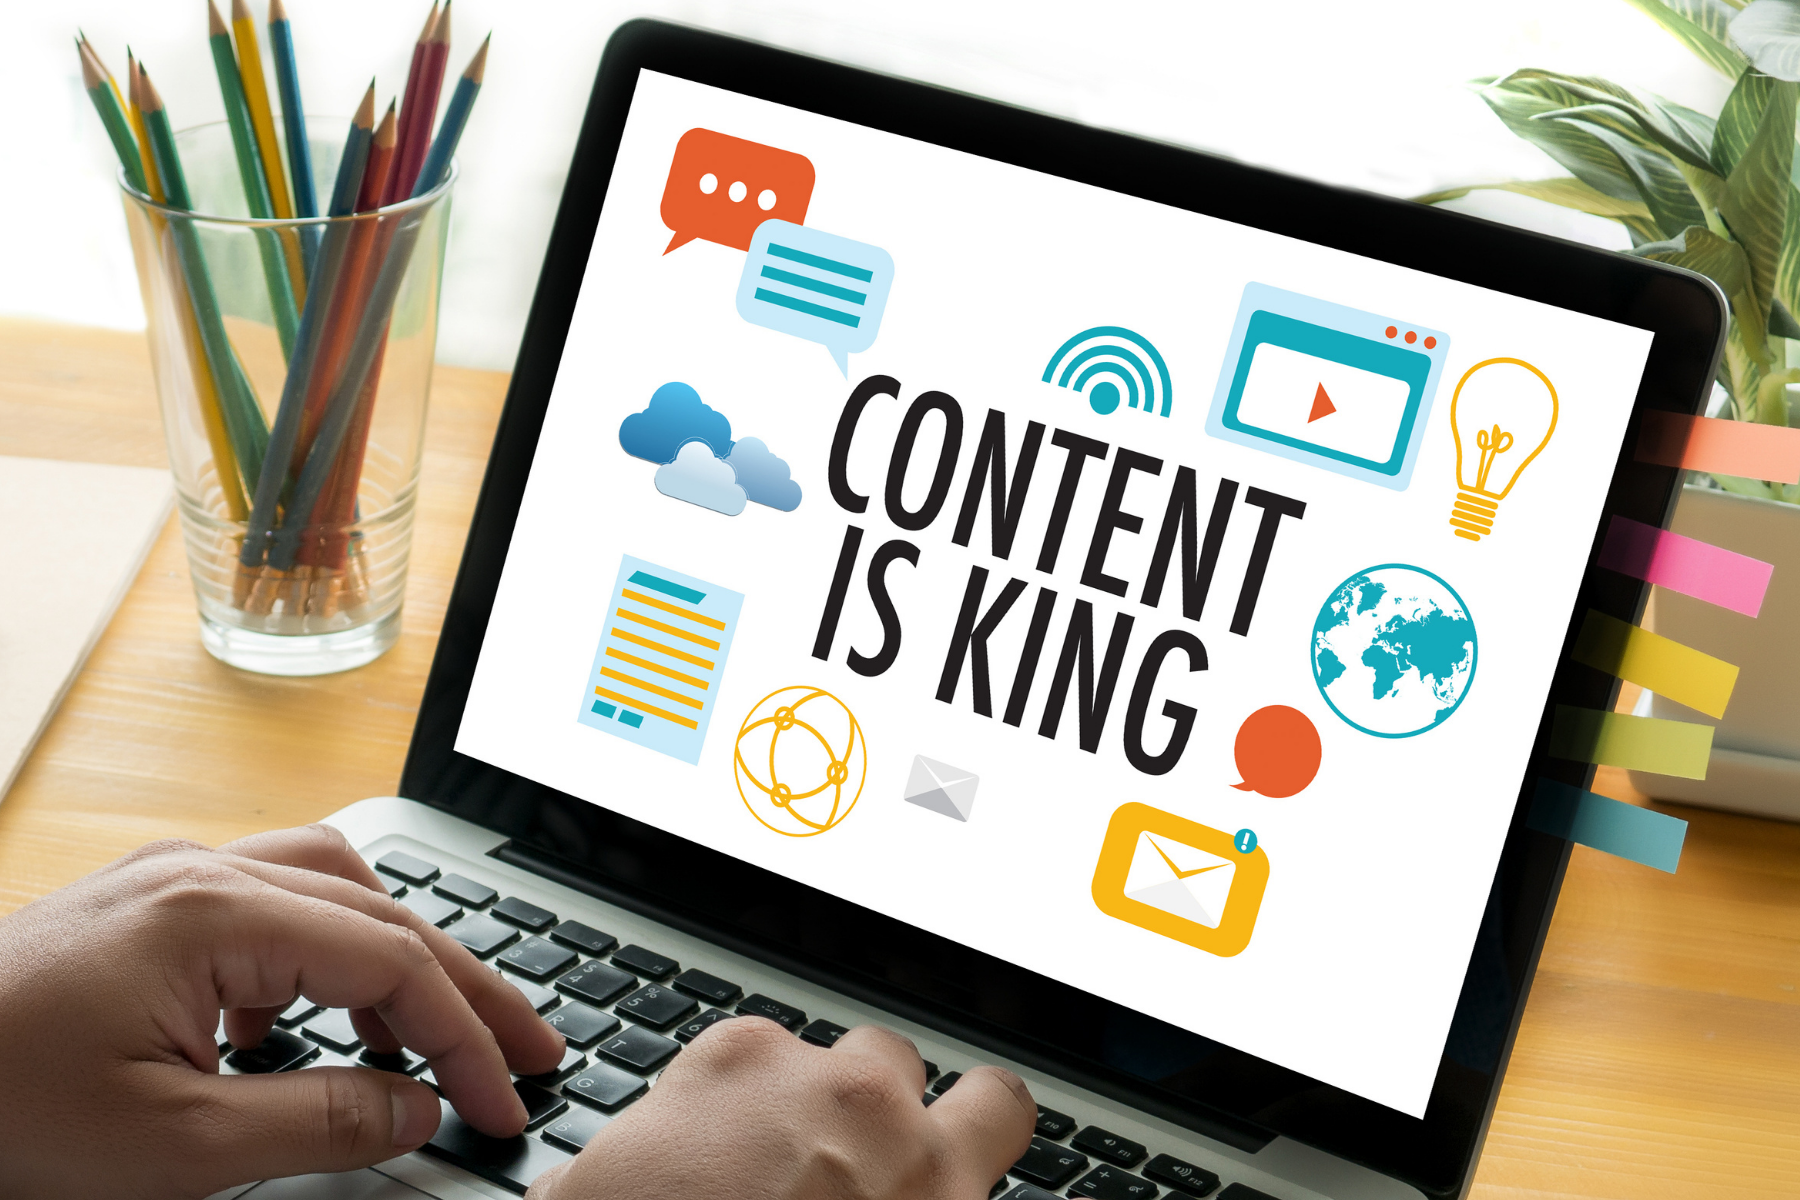 Benefits of Content Marketing